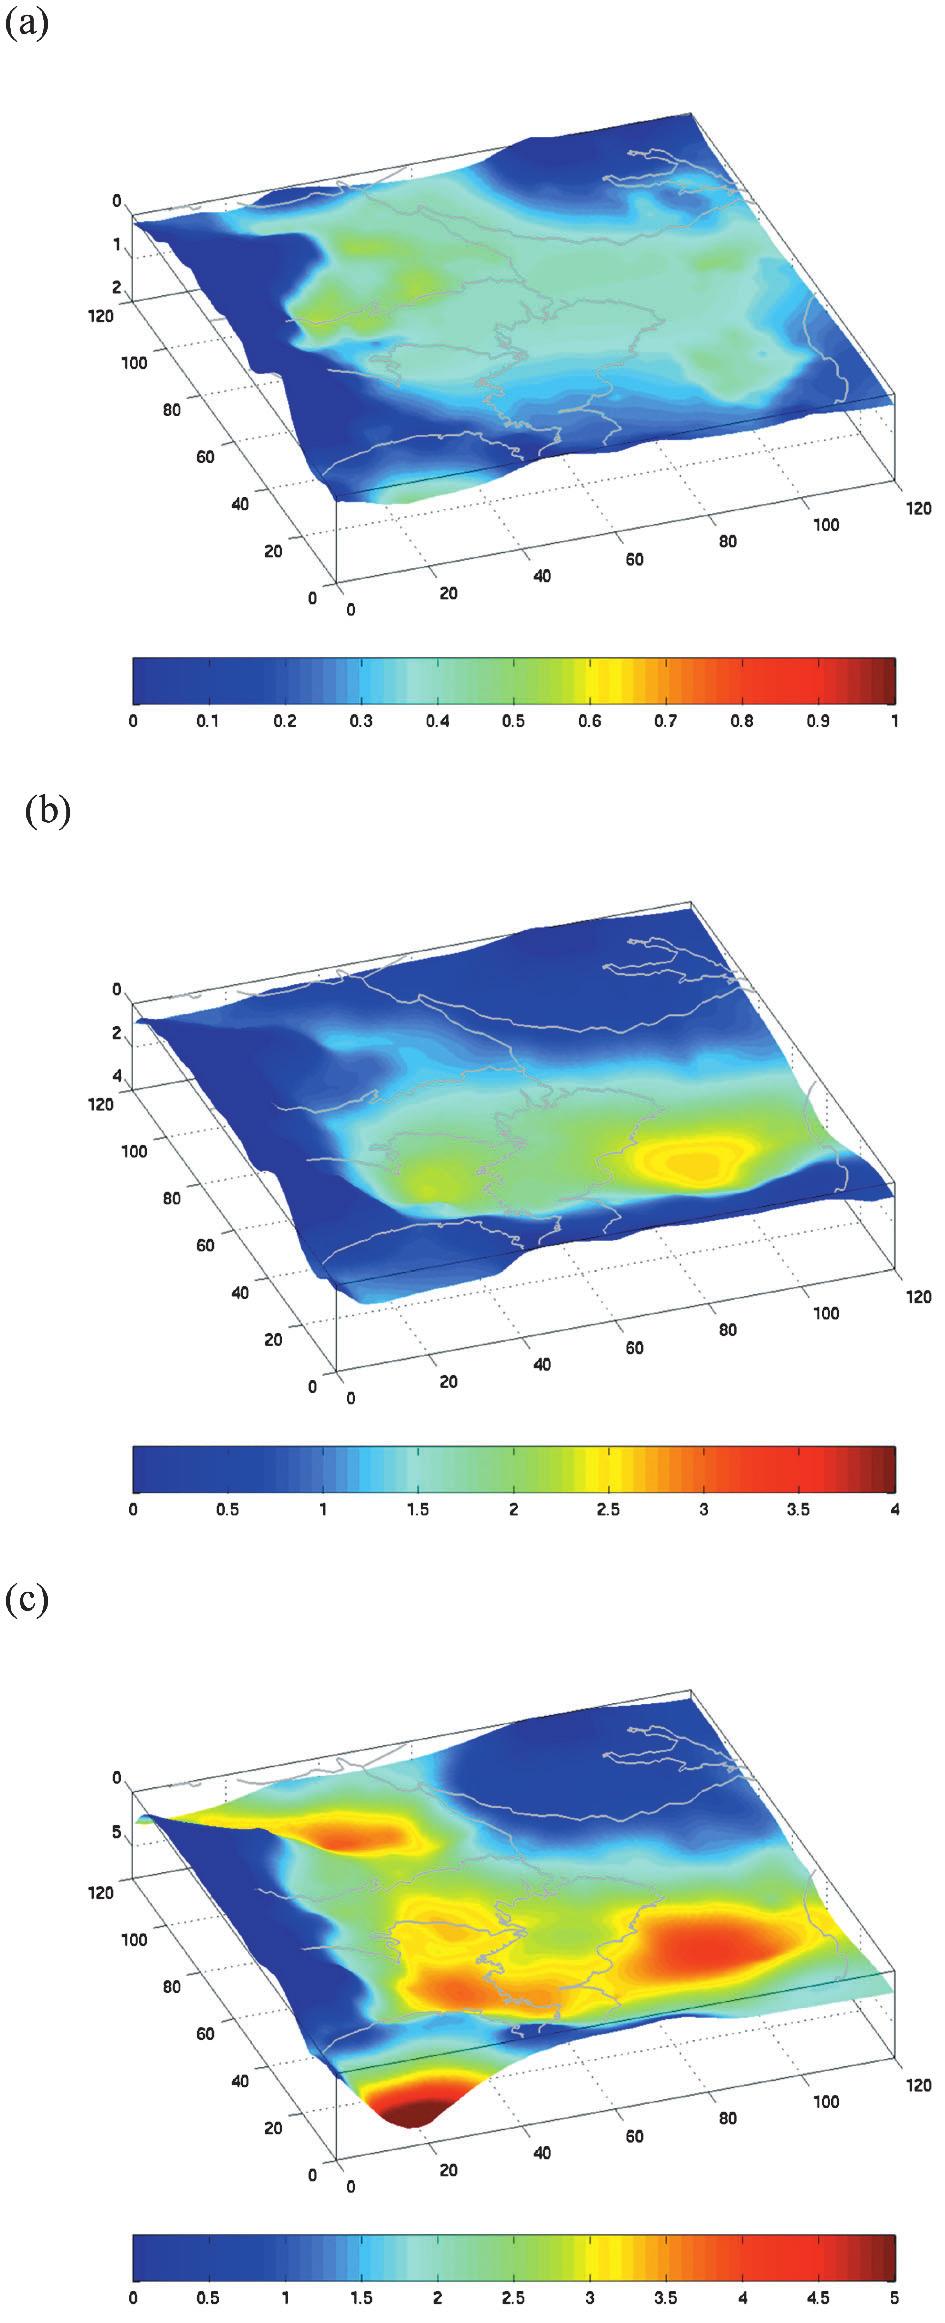 H. Miyake, K. Koketsu, R. Kobayashi, Y. Tanaka and Y. Ikegami Fig... Observed and synthetic displacement waveforms for Models A (upper) and B (lower) at University of Tokyo in Hongo. Fig. -.